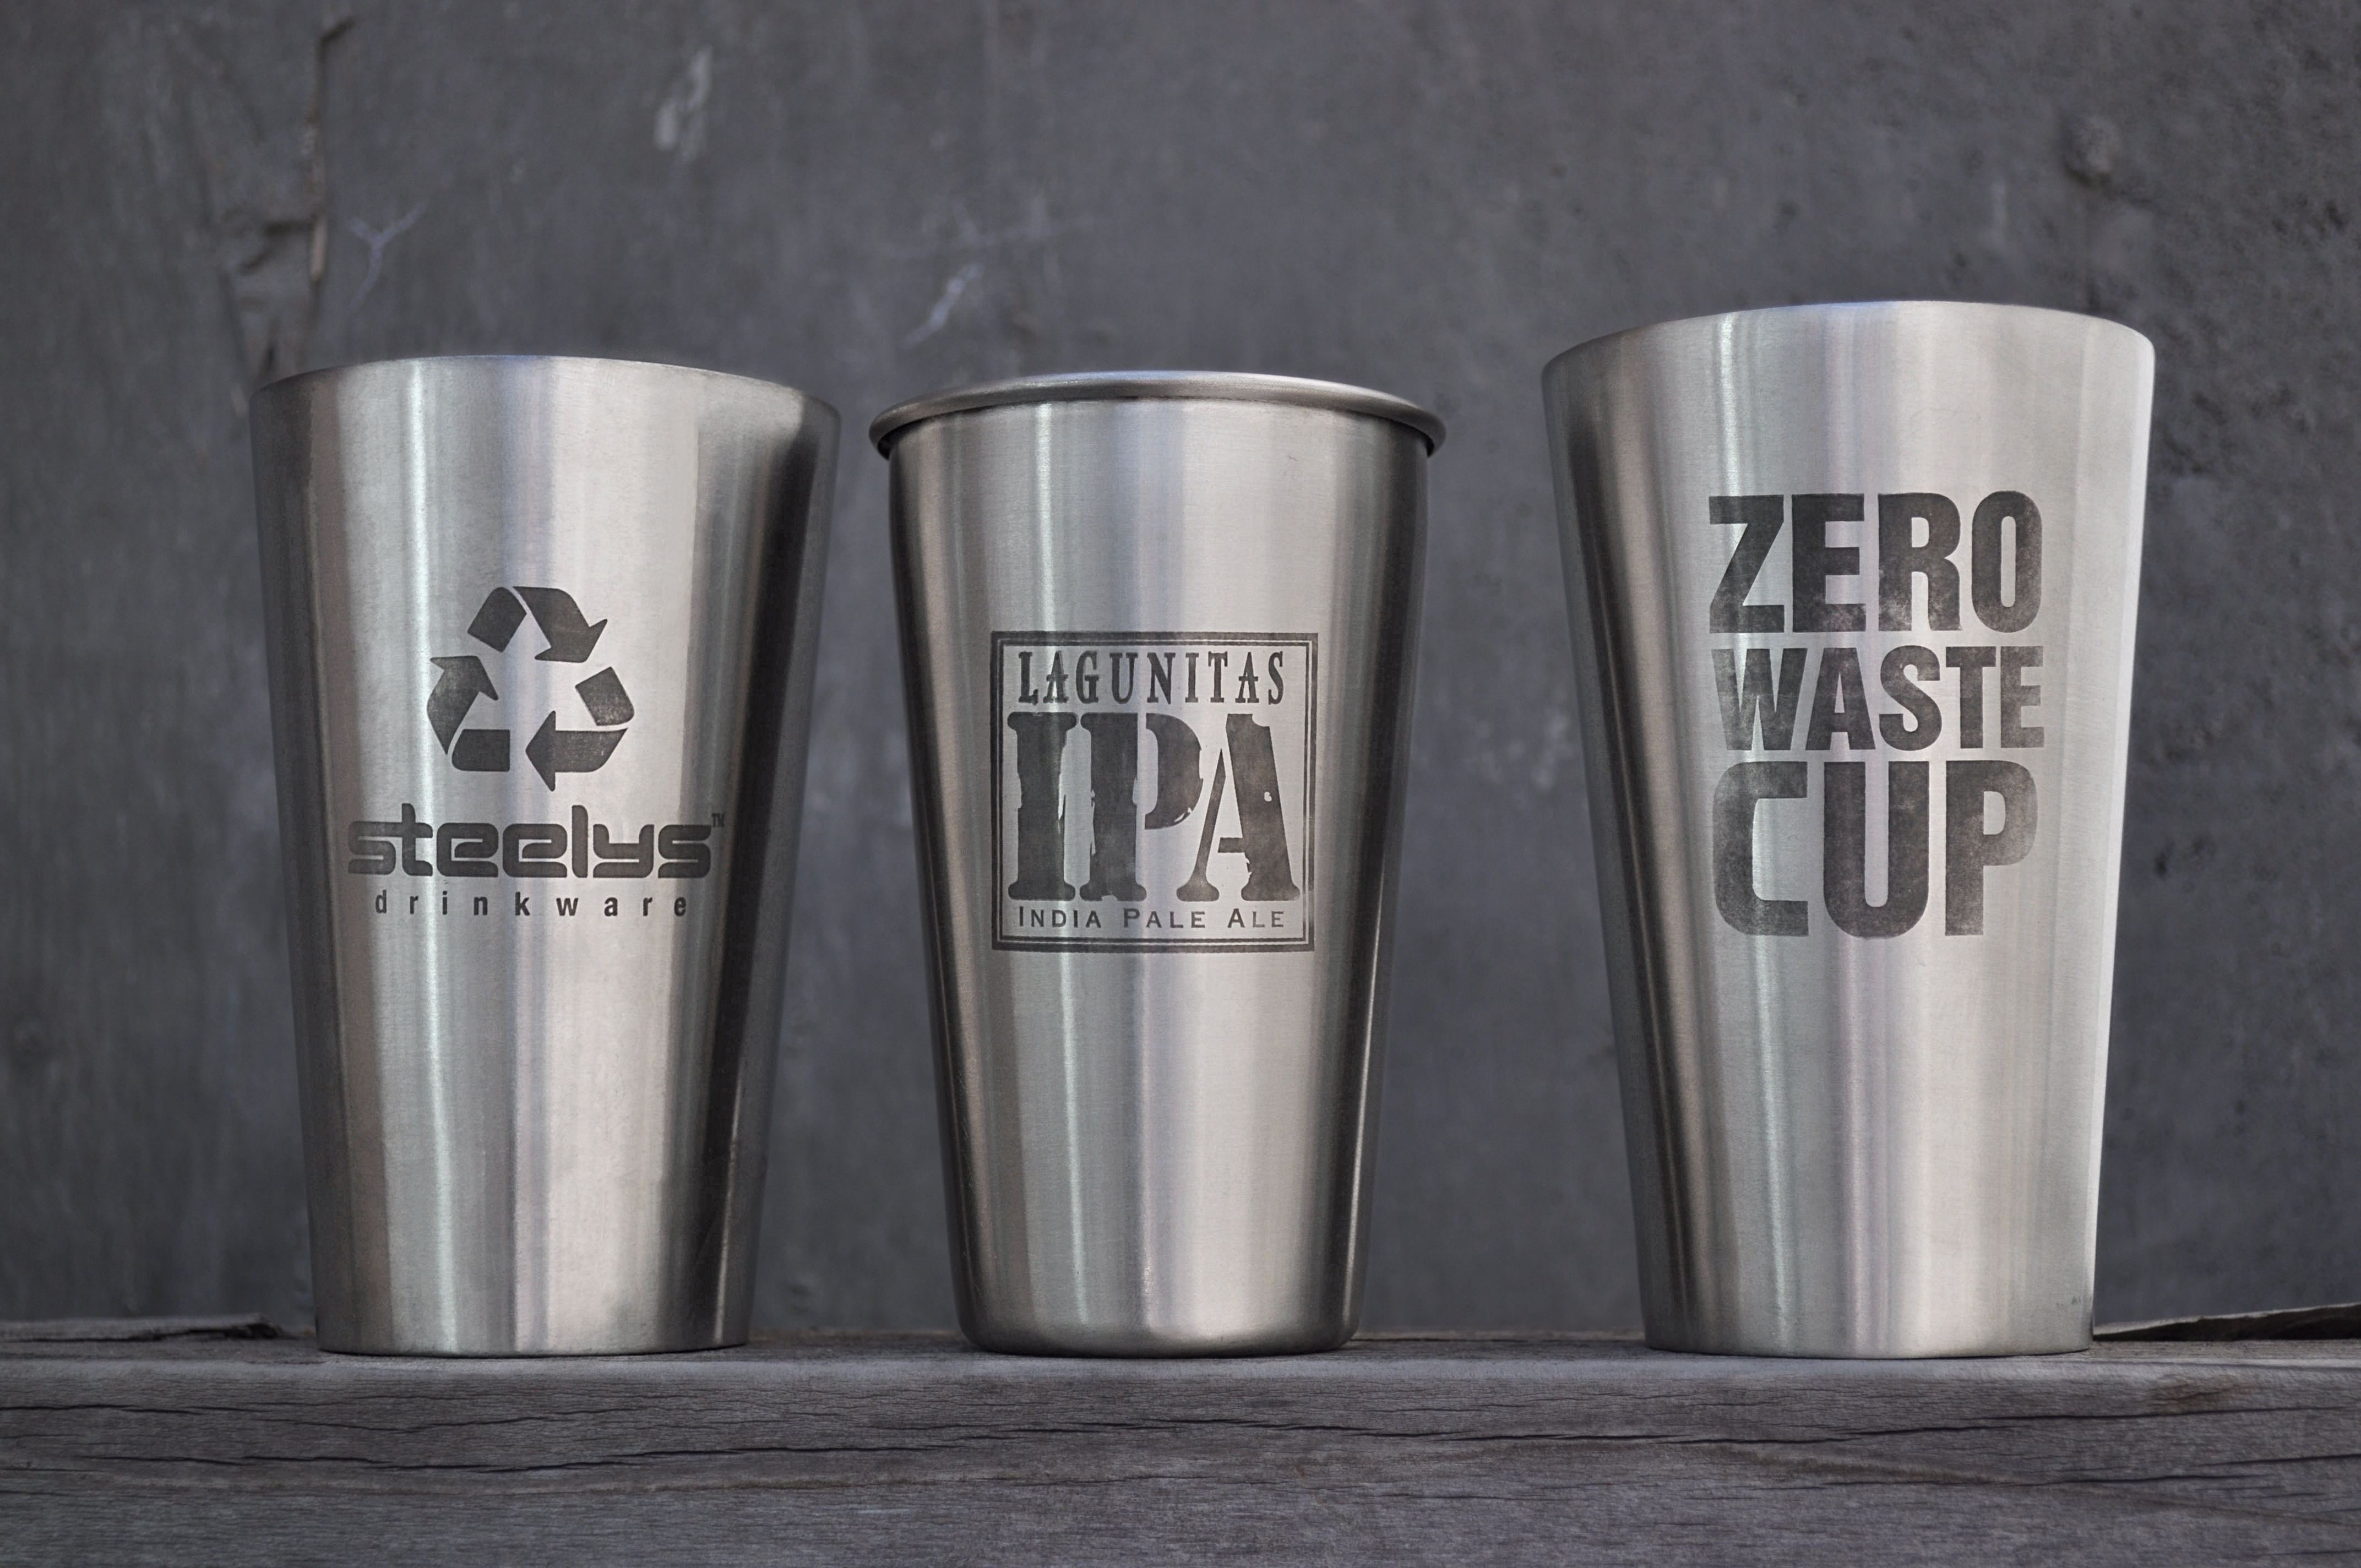 New Reusable Stainless Steel Cup Products Help Summer Events Go Green